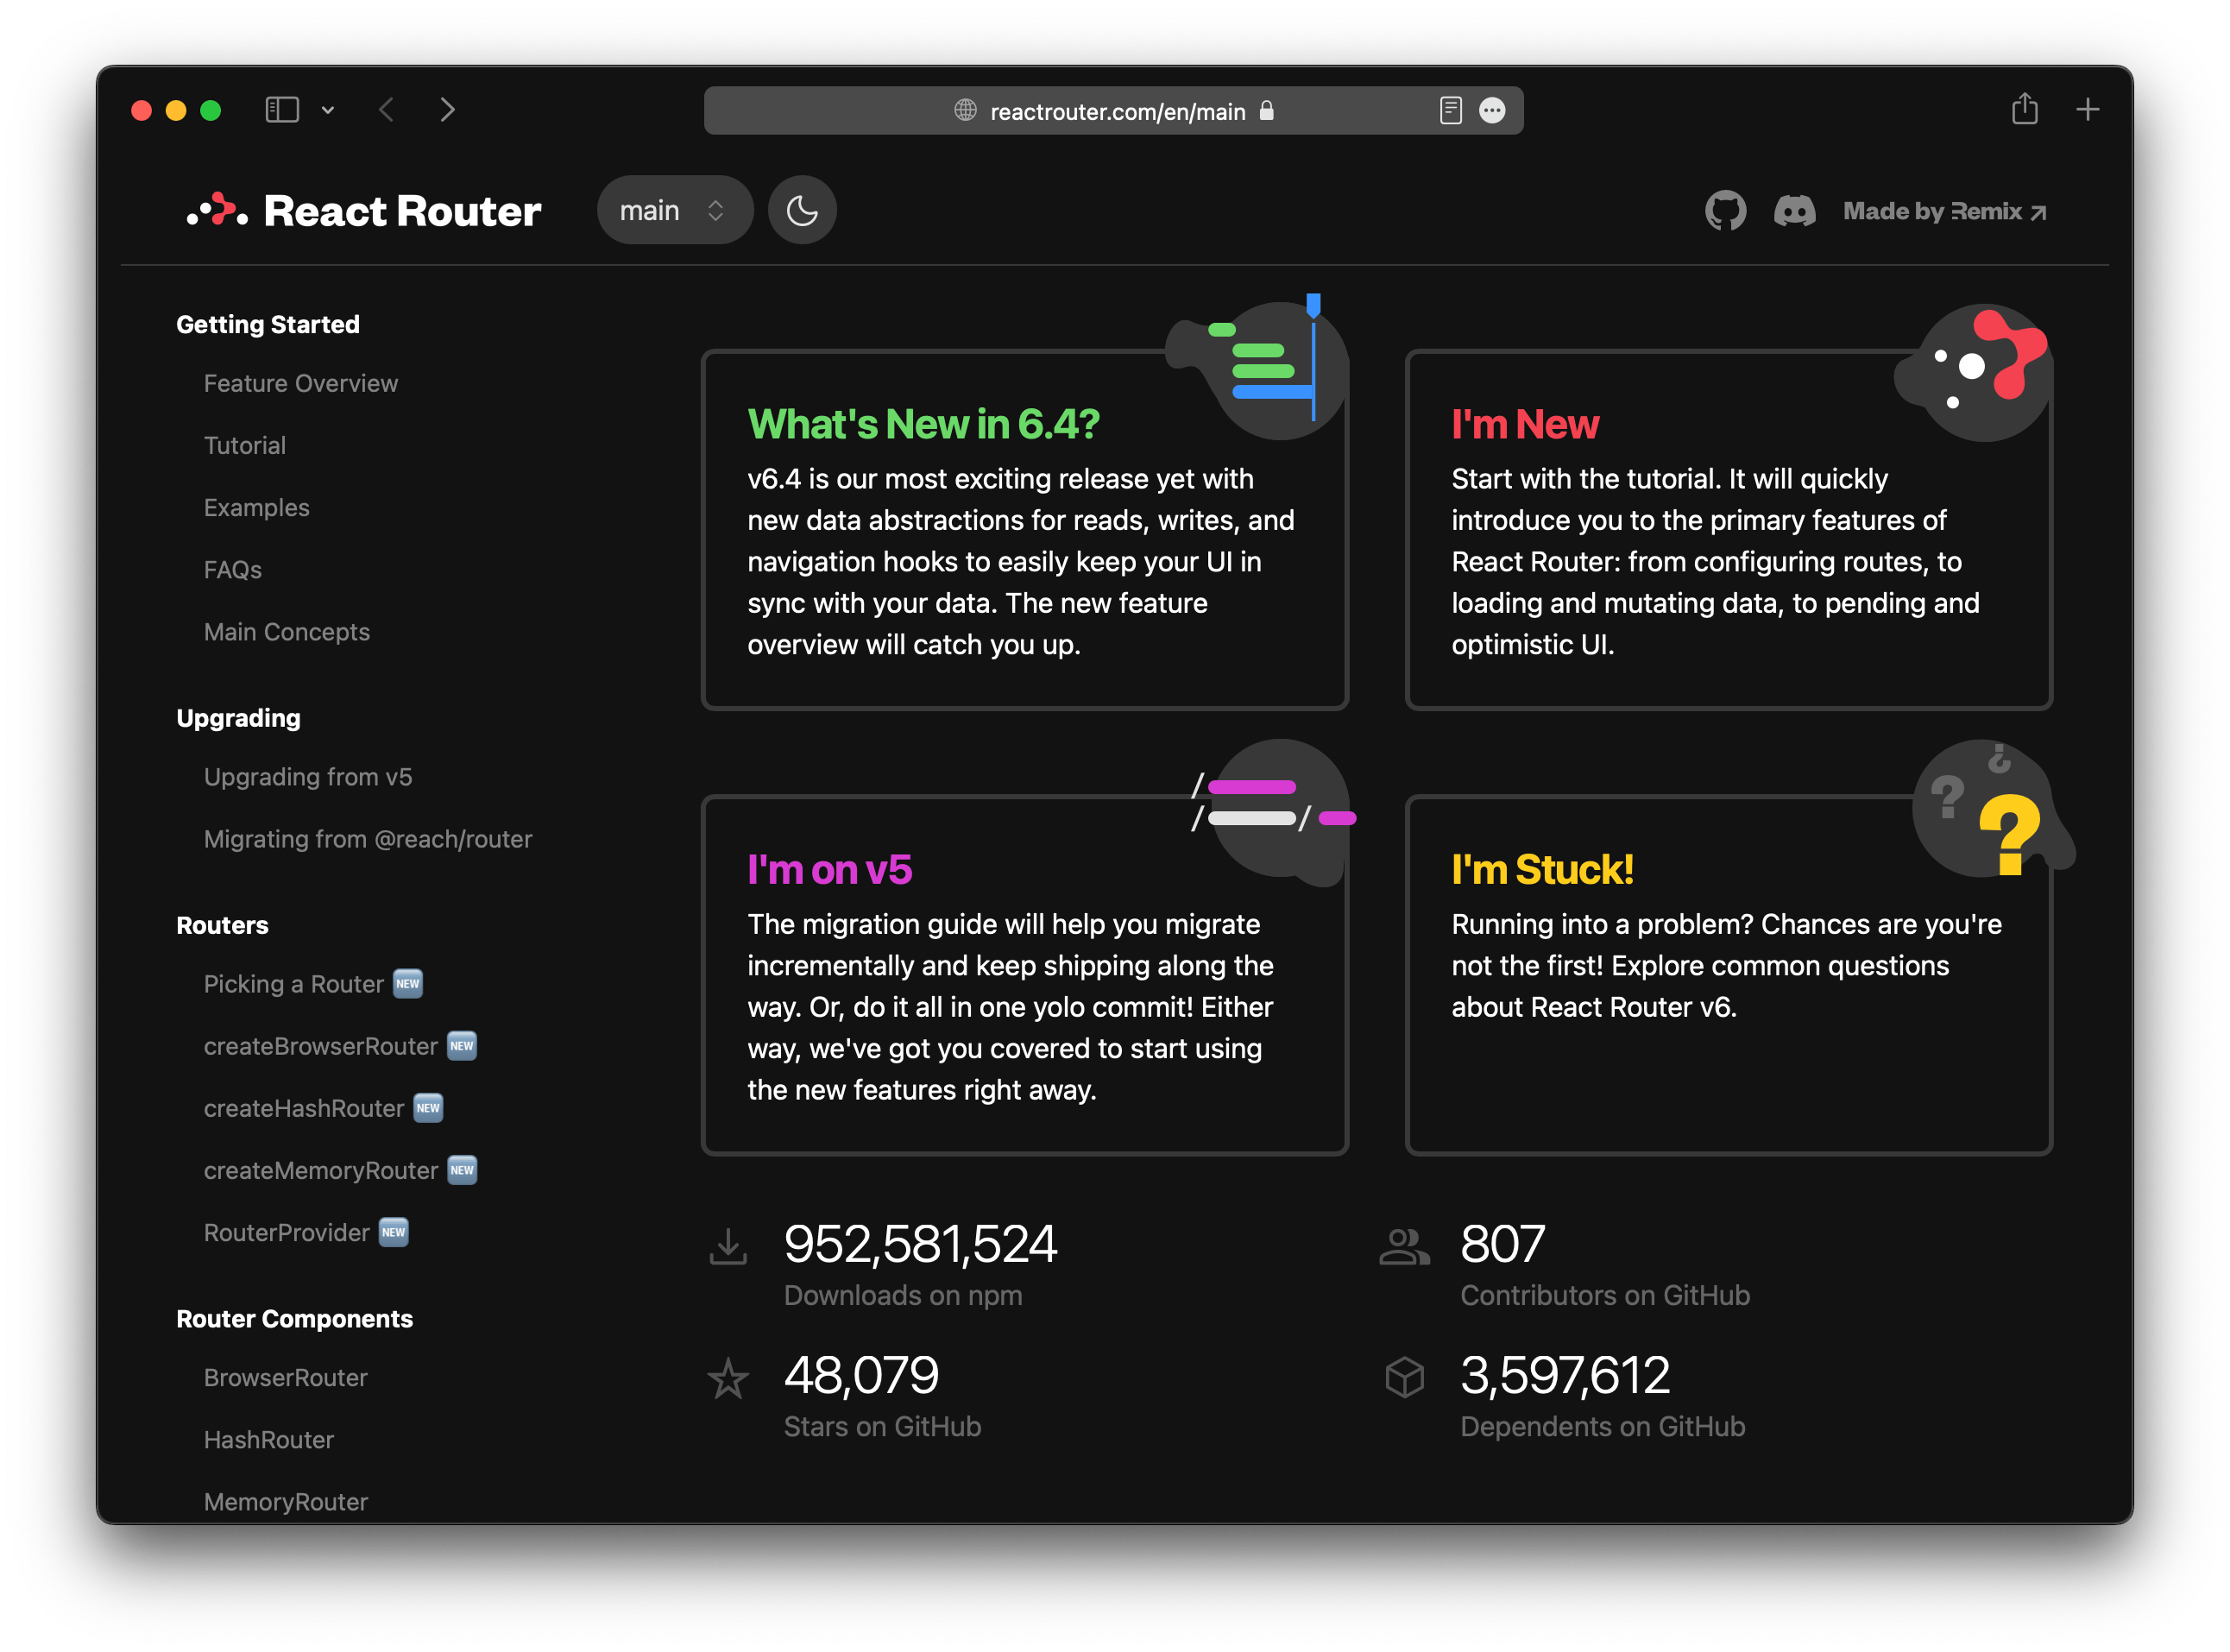 Screenshot of the new design for reactrouter.com in dark mode.